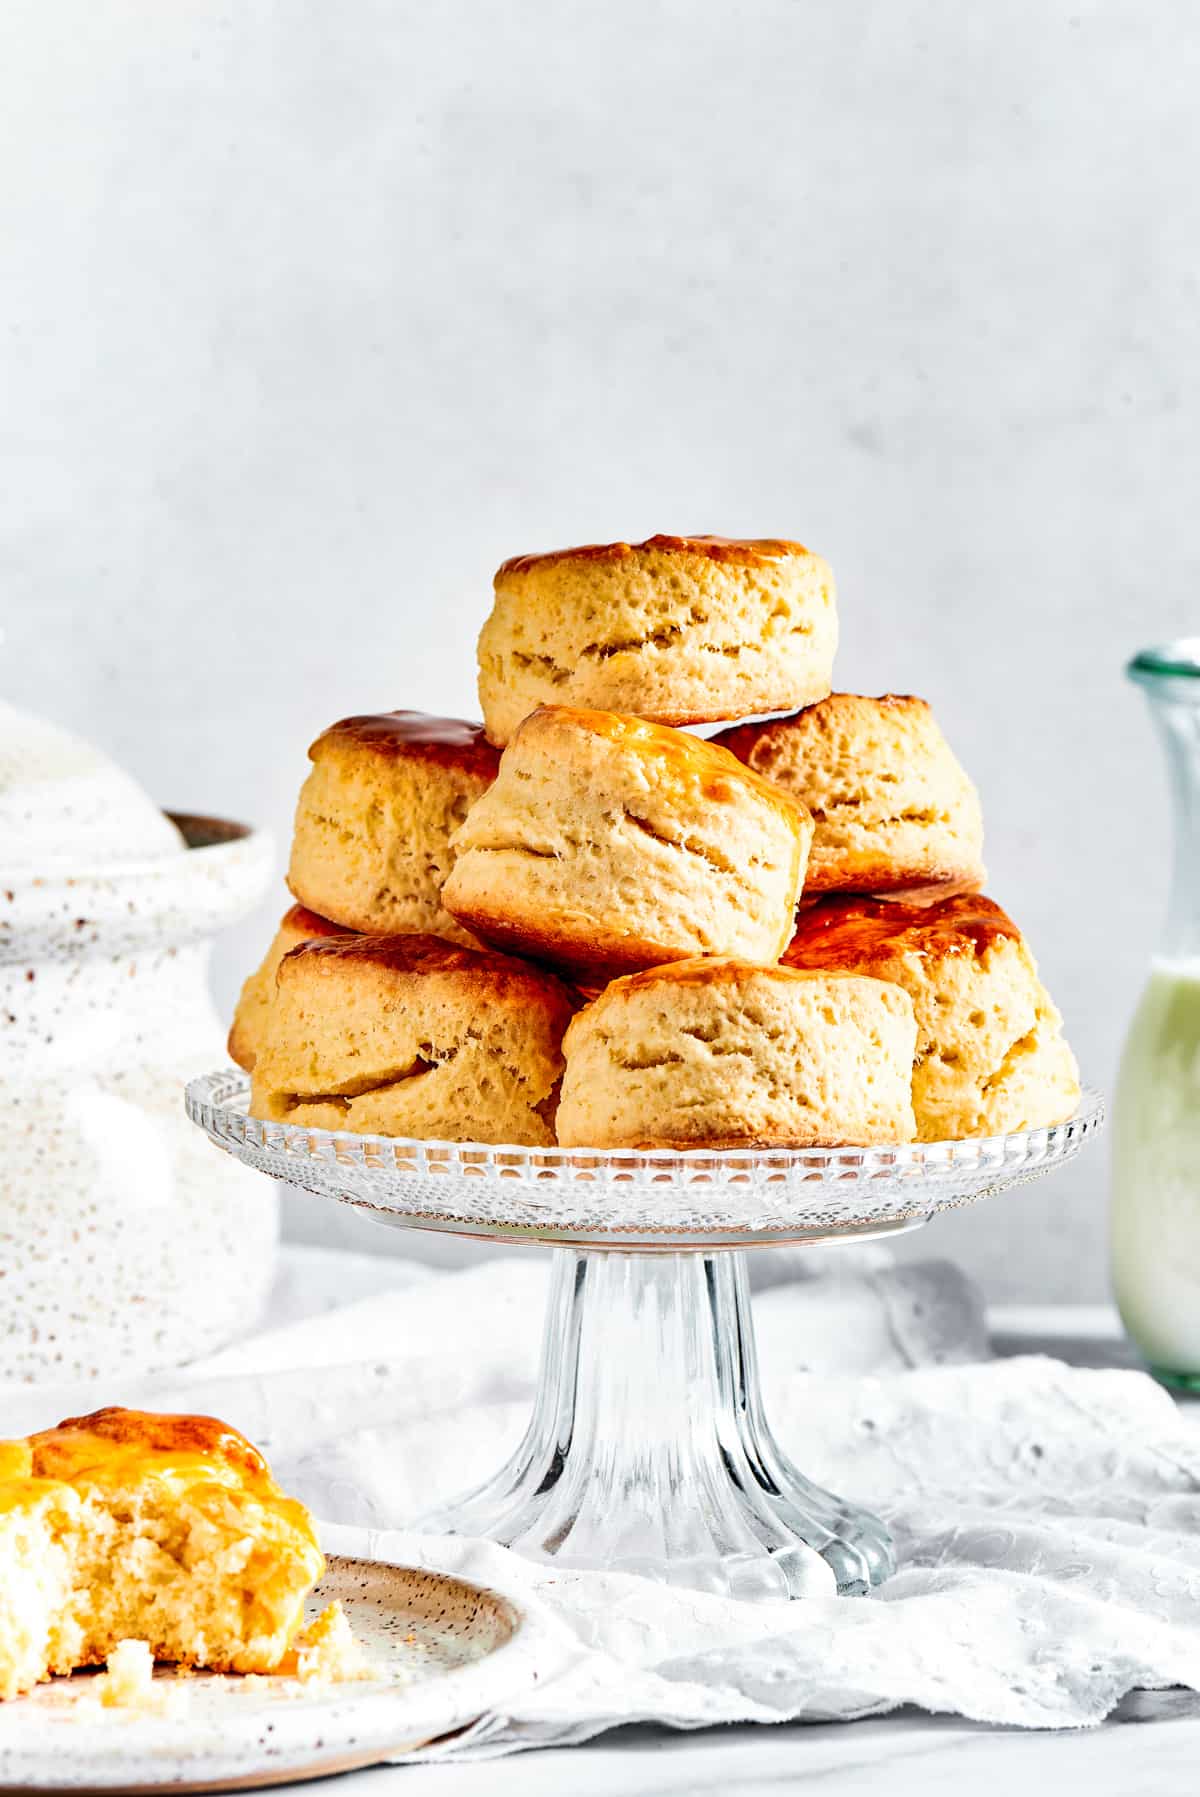 Biscuits on a cake stand, with one biscuit placed on a saucer.